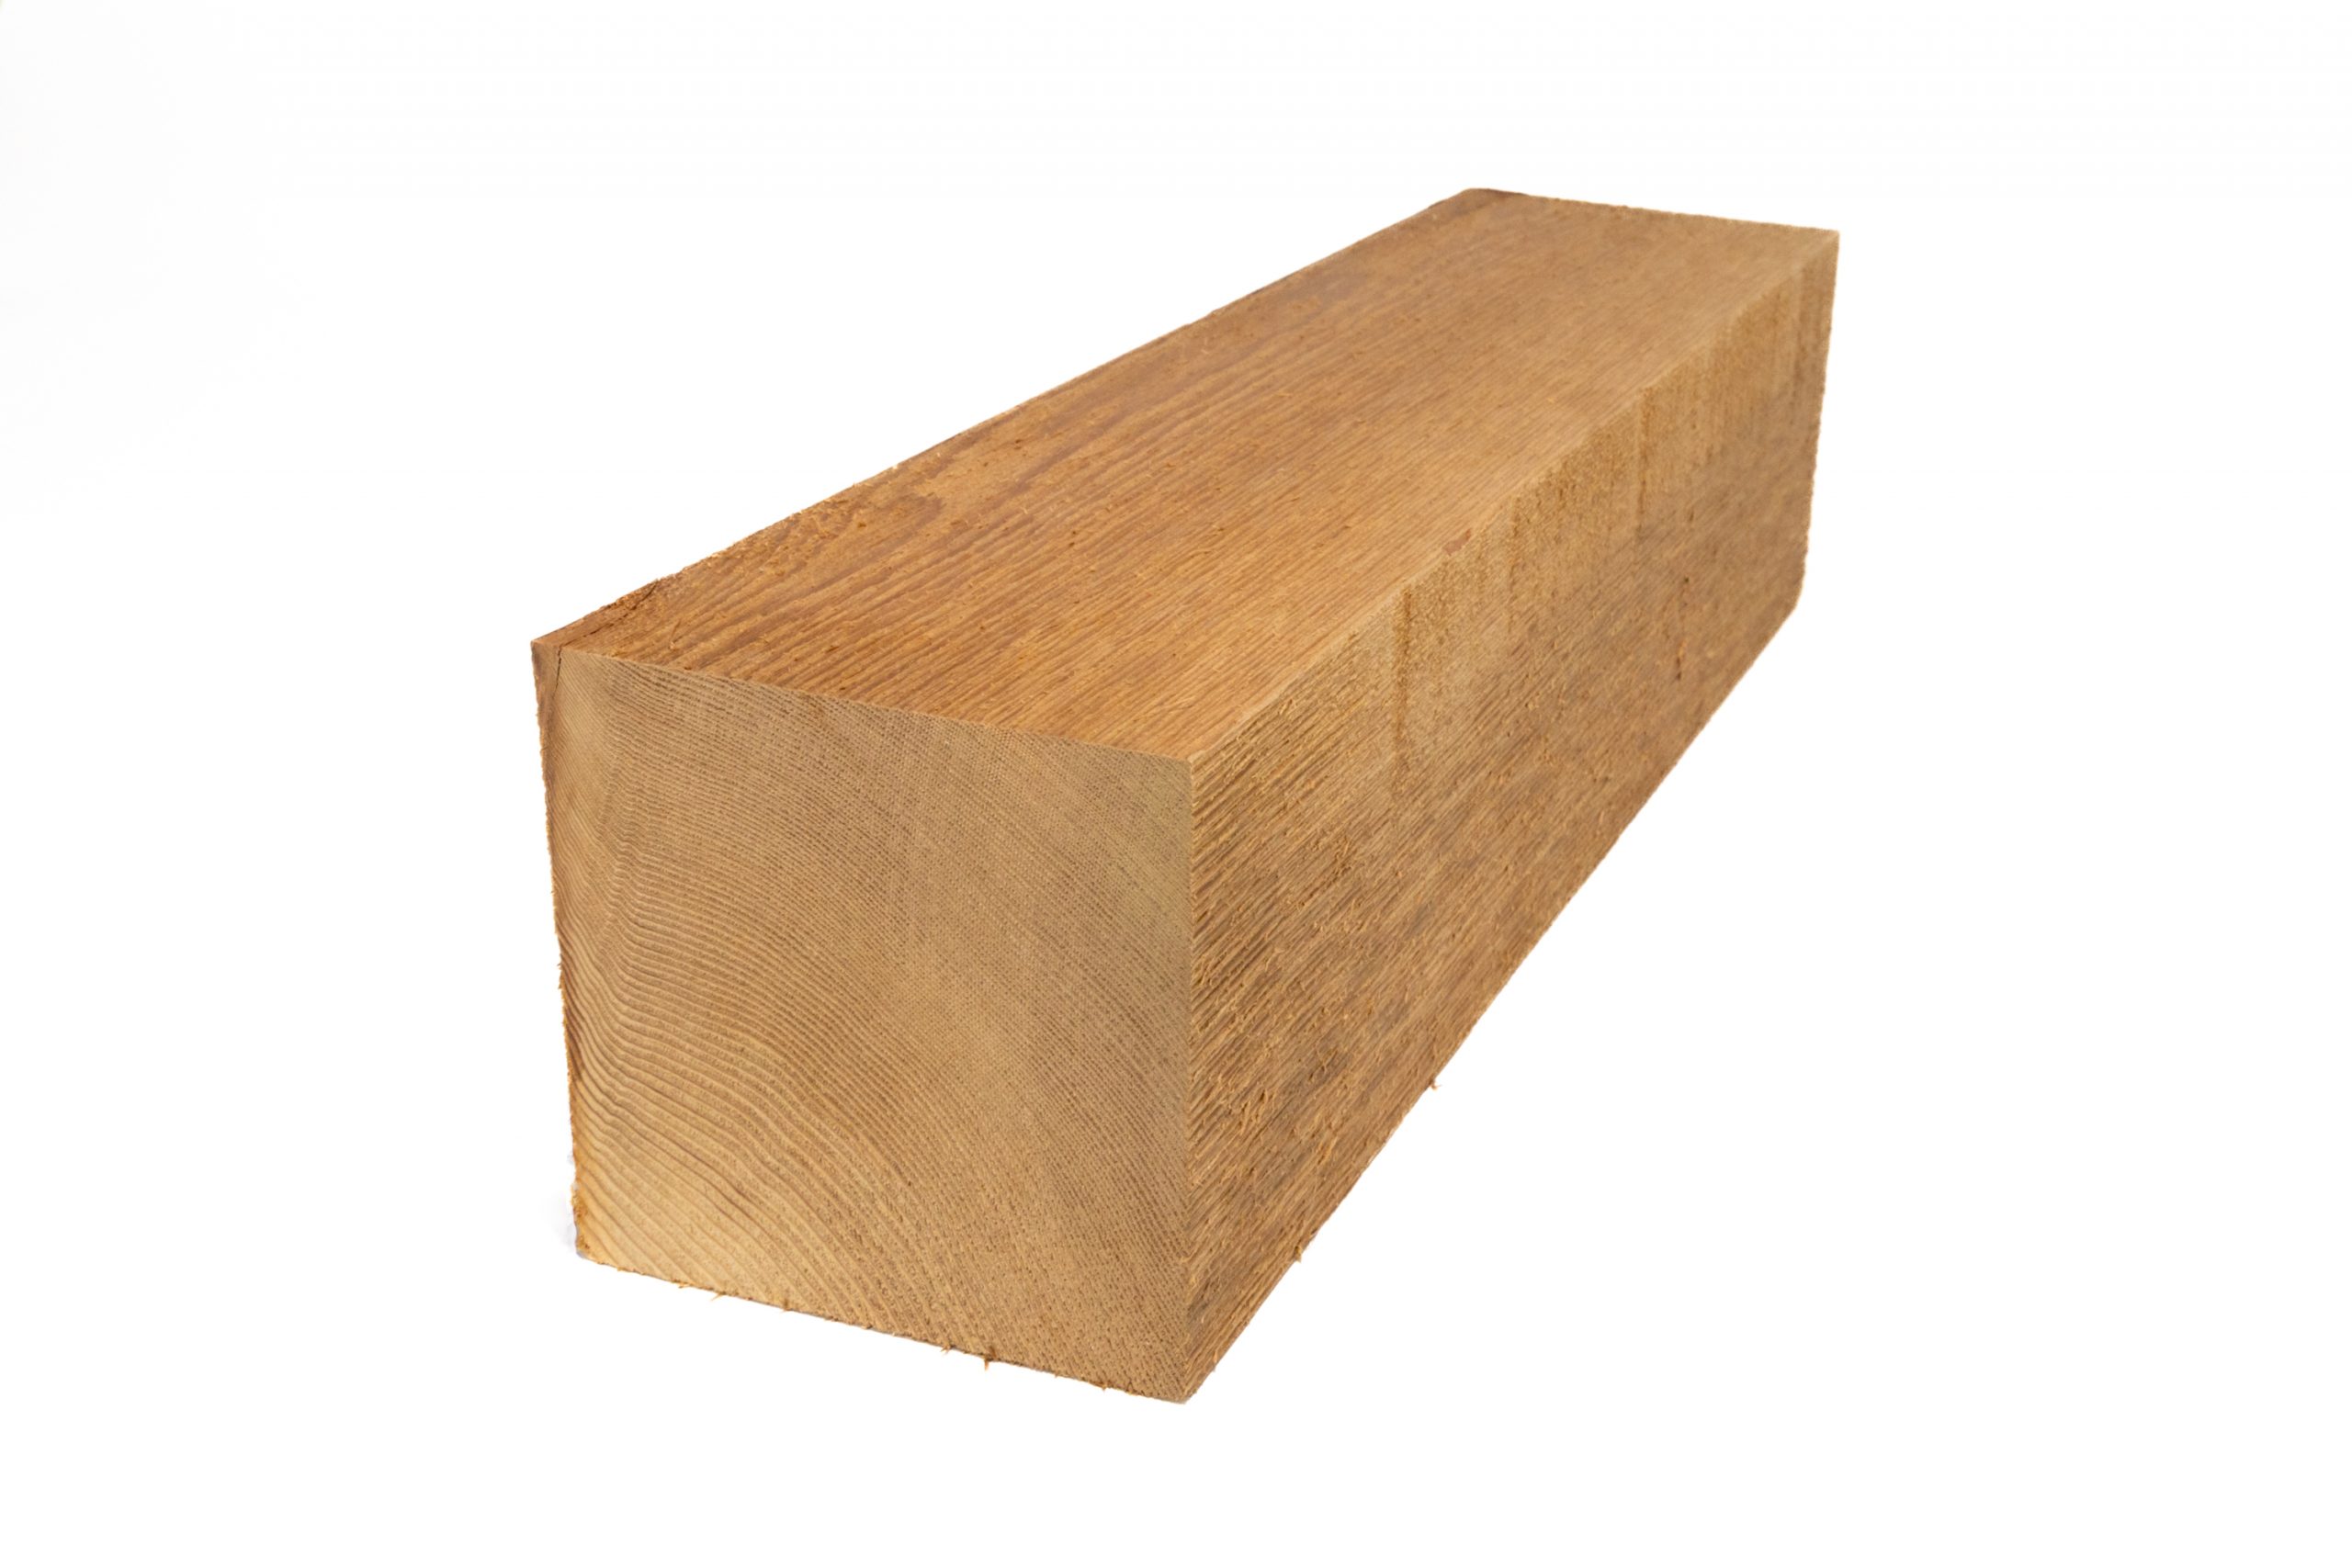 6×6, 6×8, 6x10, 6x12 Rough Sawn Appearance image